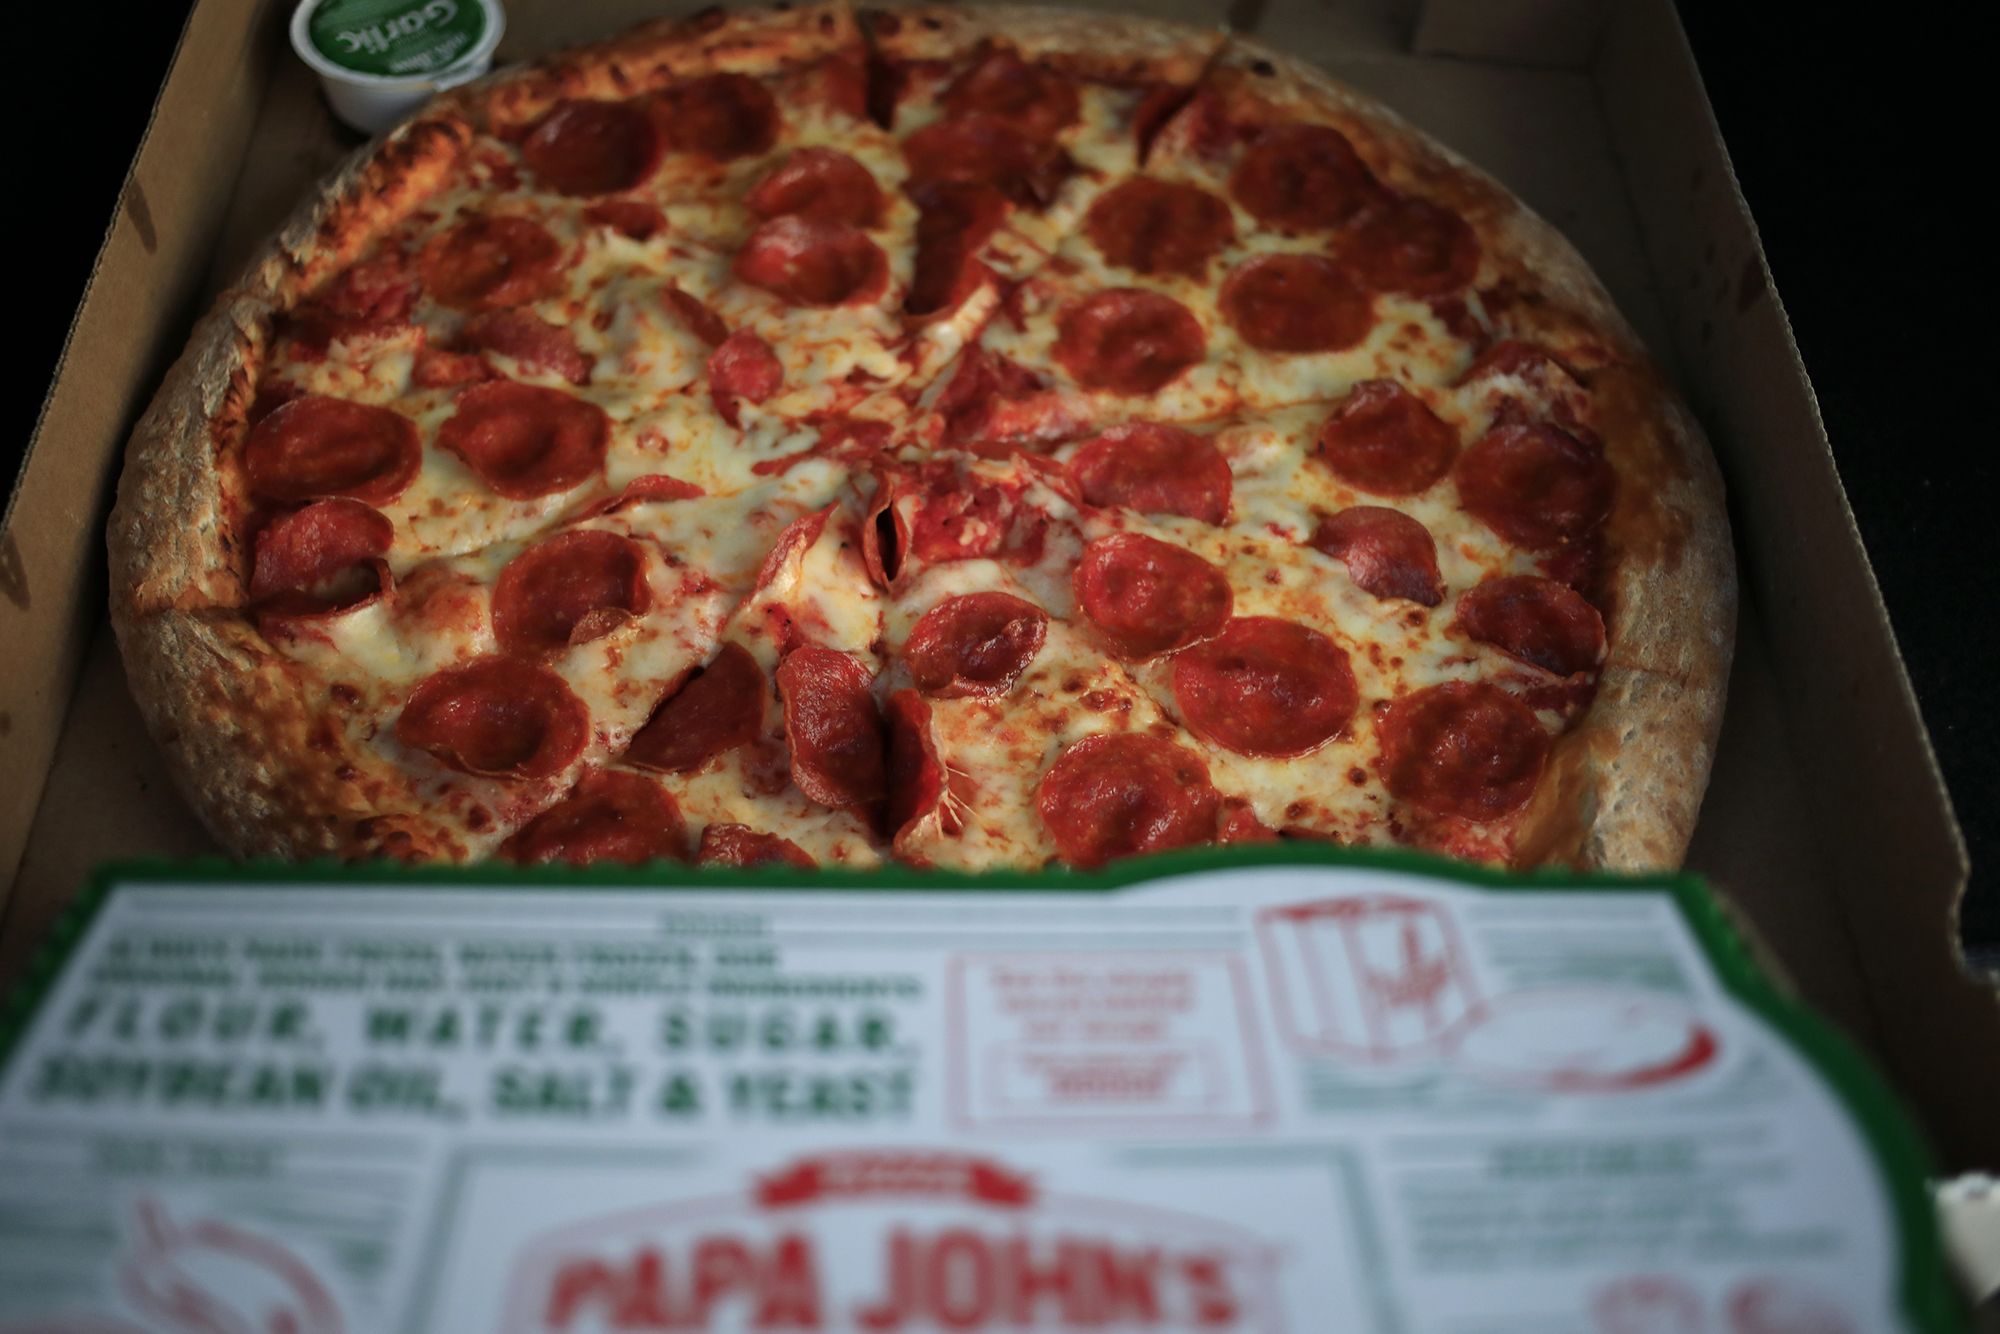 Papa John's Pizza - Sit down & relax! Papa Johns delivers fresh and hot  pizza to you! Order now online at www.papajohns.bh or via Hungerline by  calling 17506070 #PapaJohnsBahrain #PapaJohnsPizza  #BetterIngredientsBetterPizza #PizzaTime #